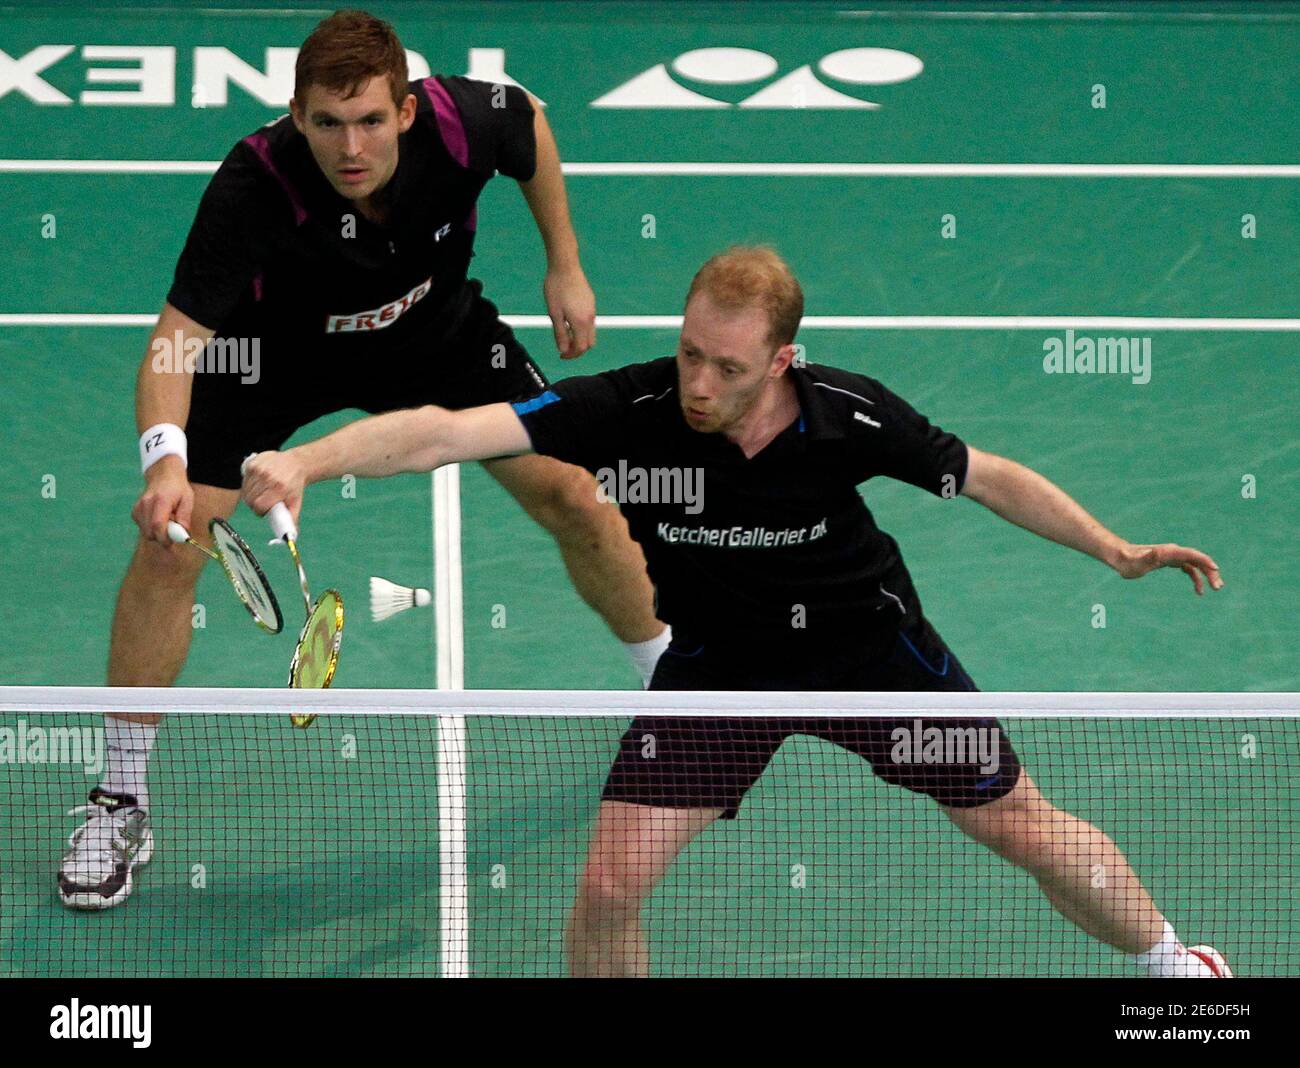 Denmark's Jonas Rasmussen hits a return as teammate Mads Conrads-Petersen  looks on during their match against China's Guo Zhendong / Chai Biao in the  men's doubles finals of Malaysian Open Super Series